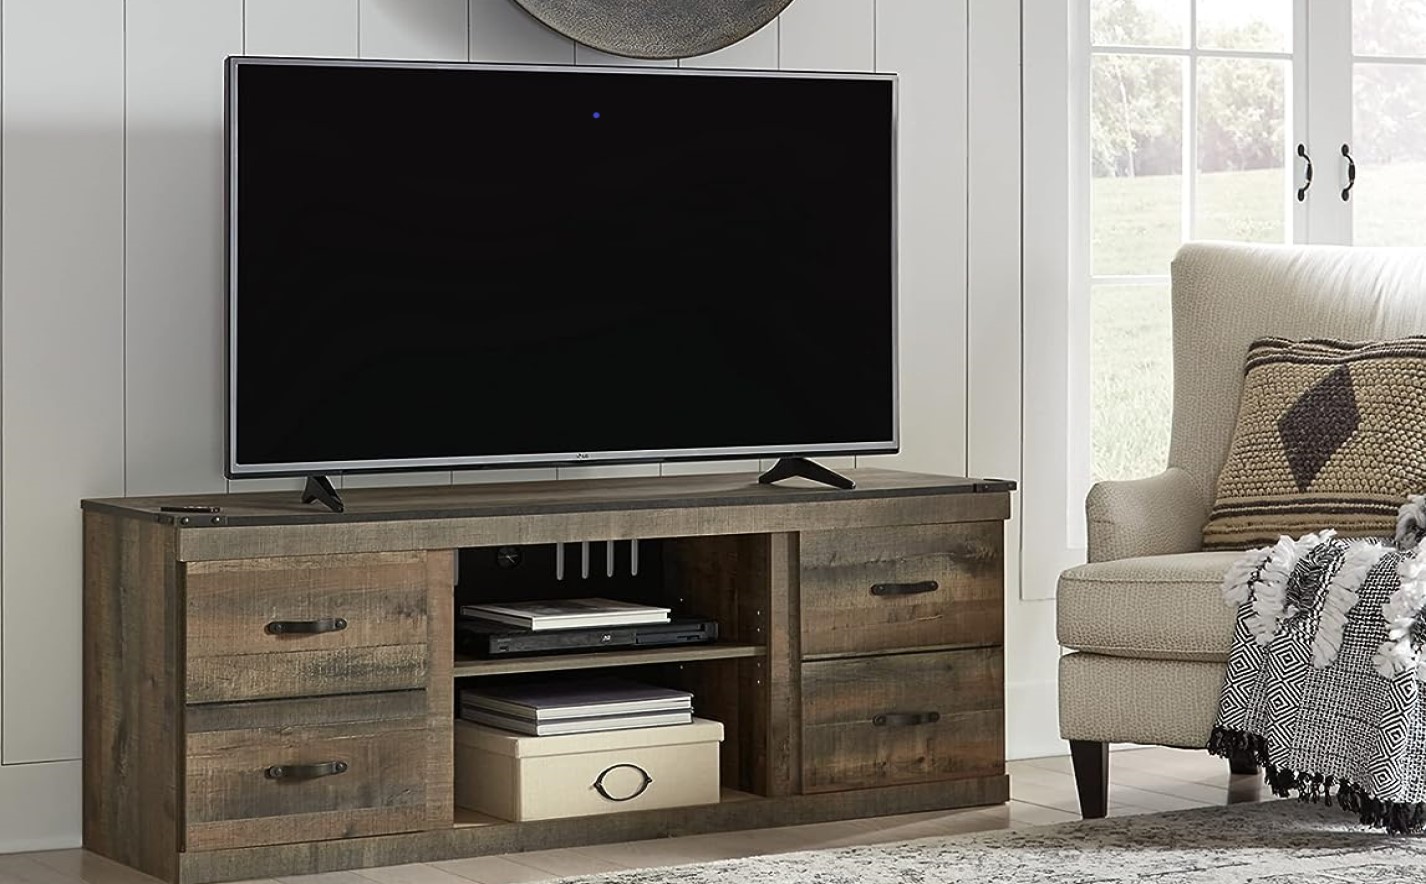 Ashley Furniture TV Stands: 3 Of The Best Models Reviewed